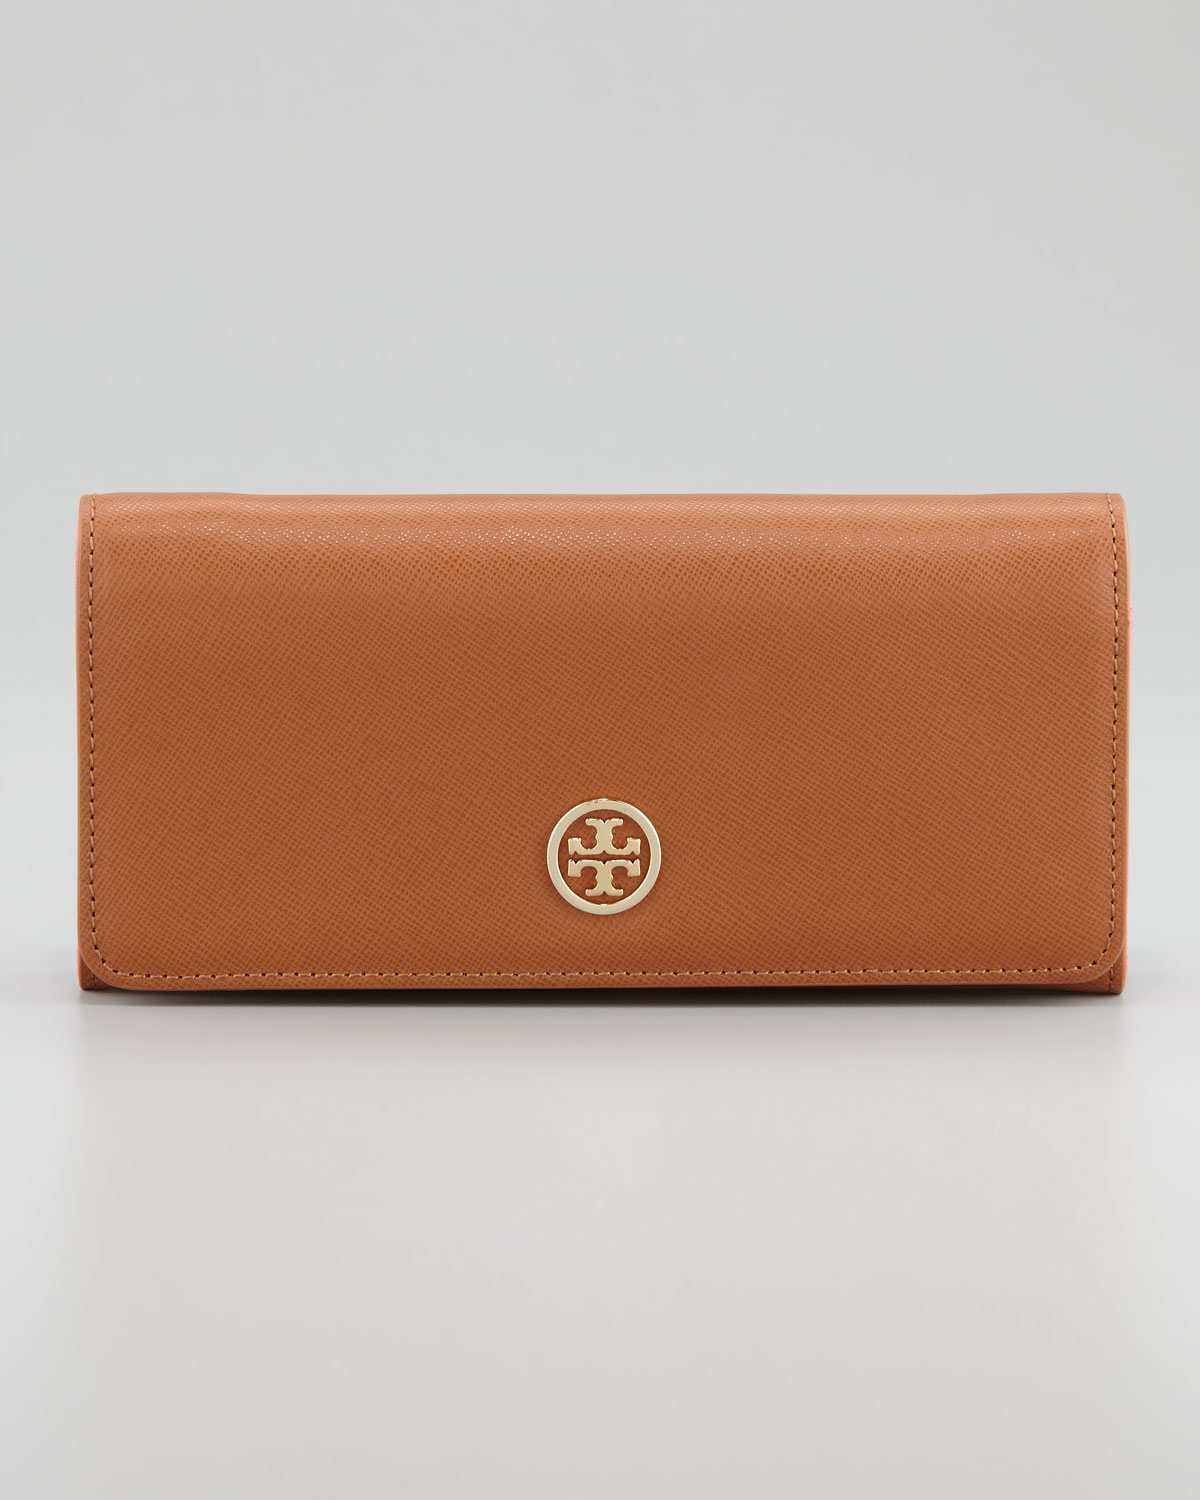 Lyst - Tory Burch Robinson Envelope Continental Wallet in Brown